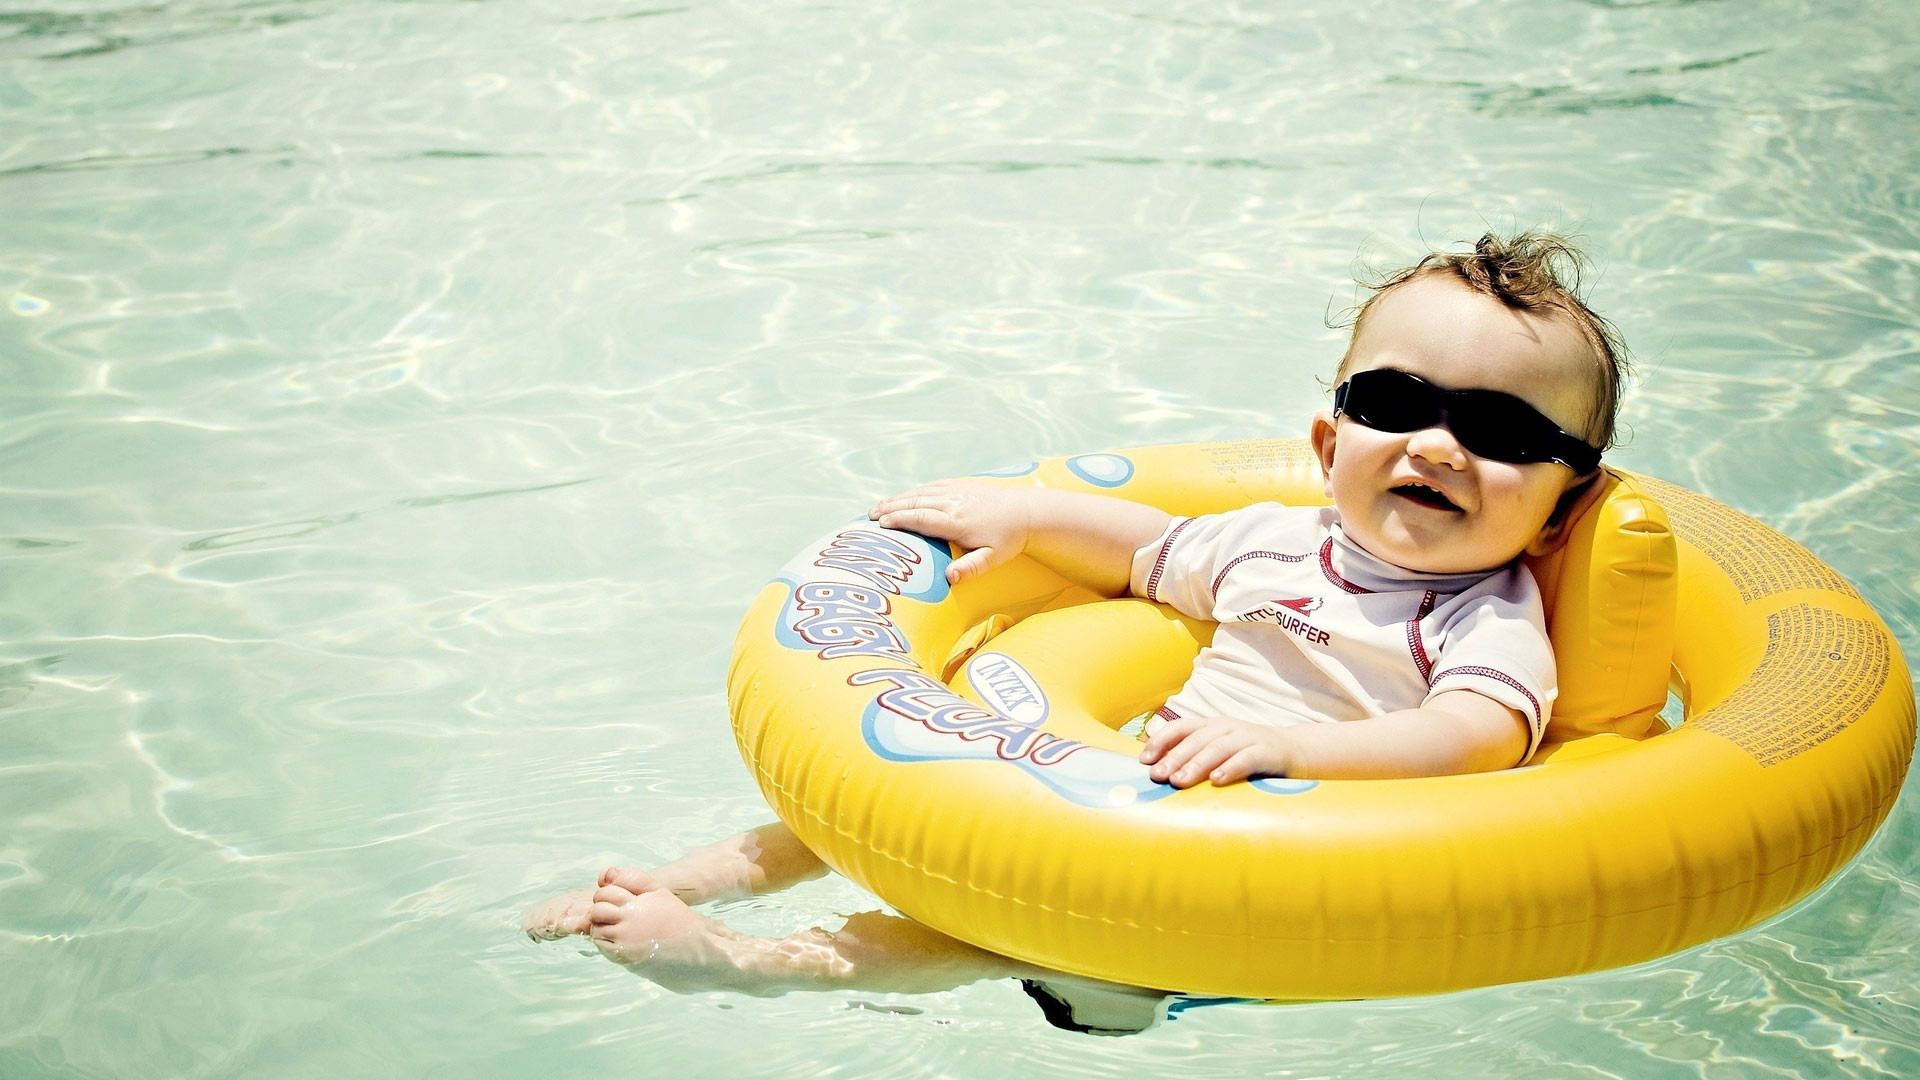 Funny babe boy in swimming pool wallpaper